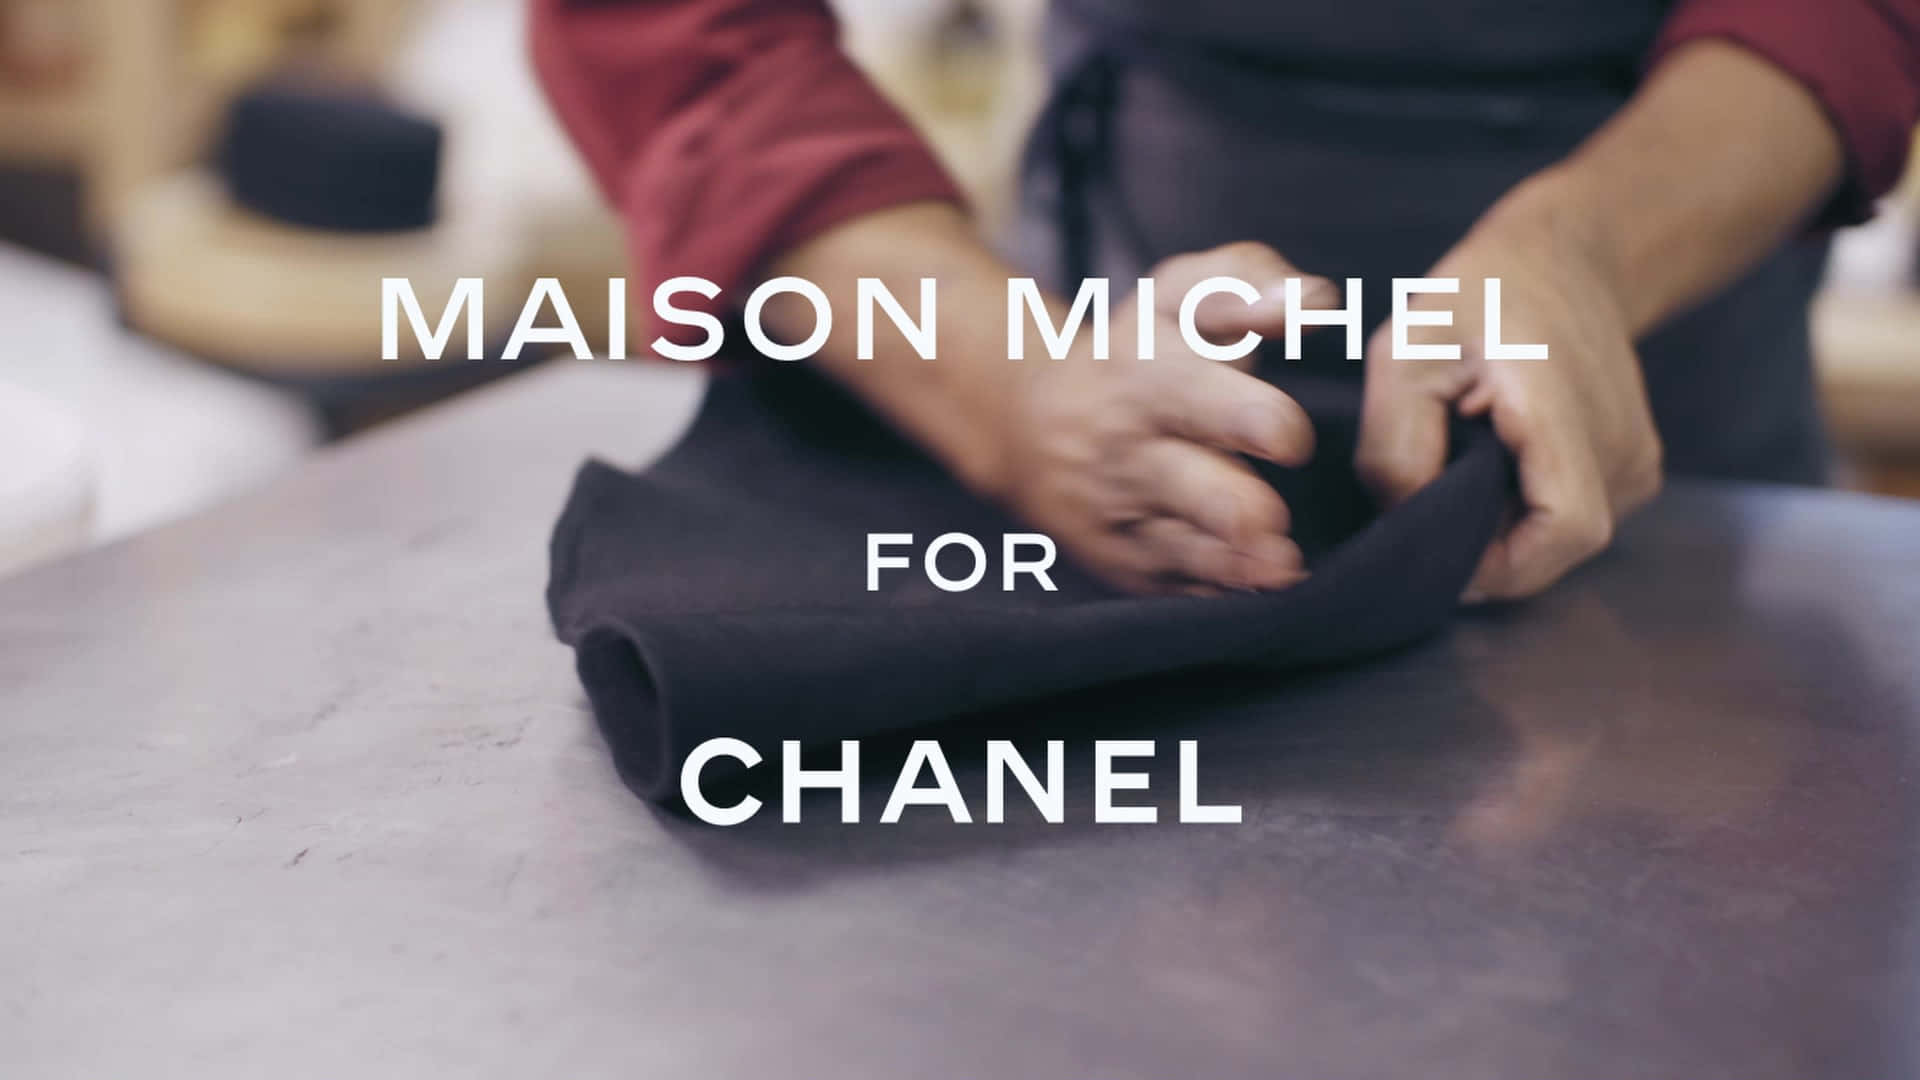 Maison Michel And Chanel Ad Background